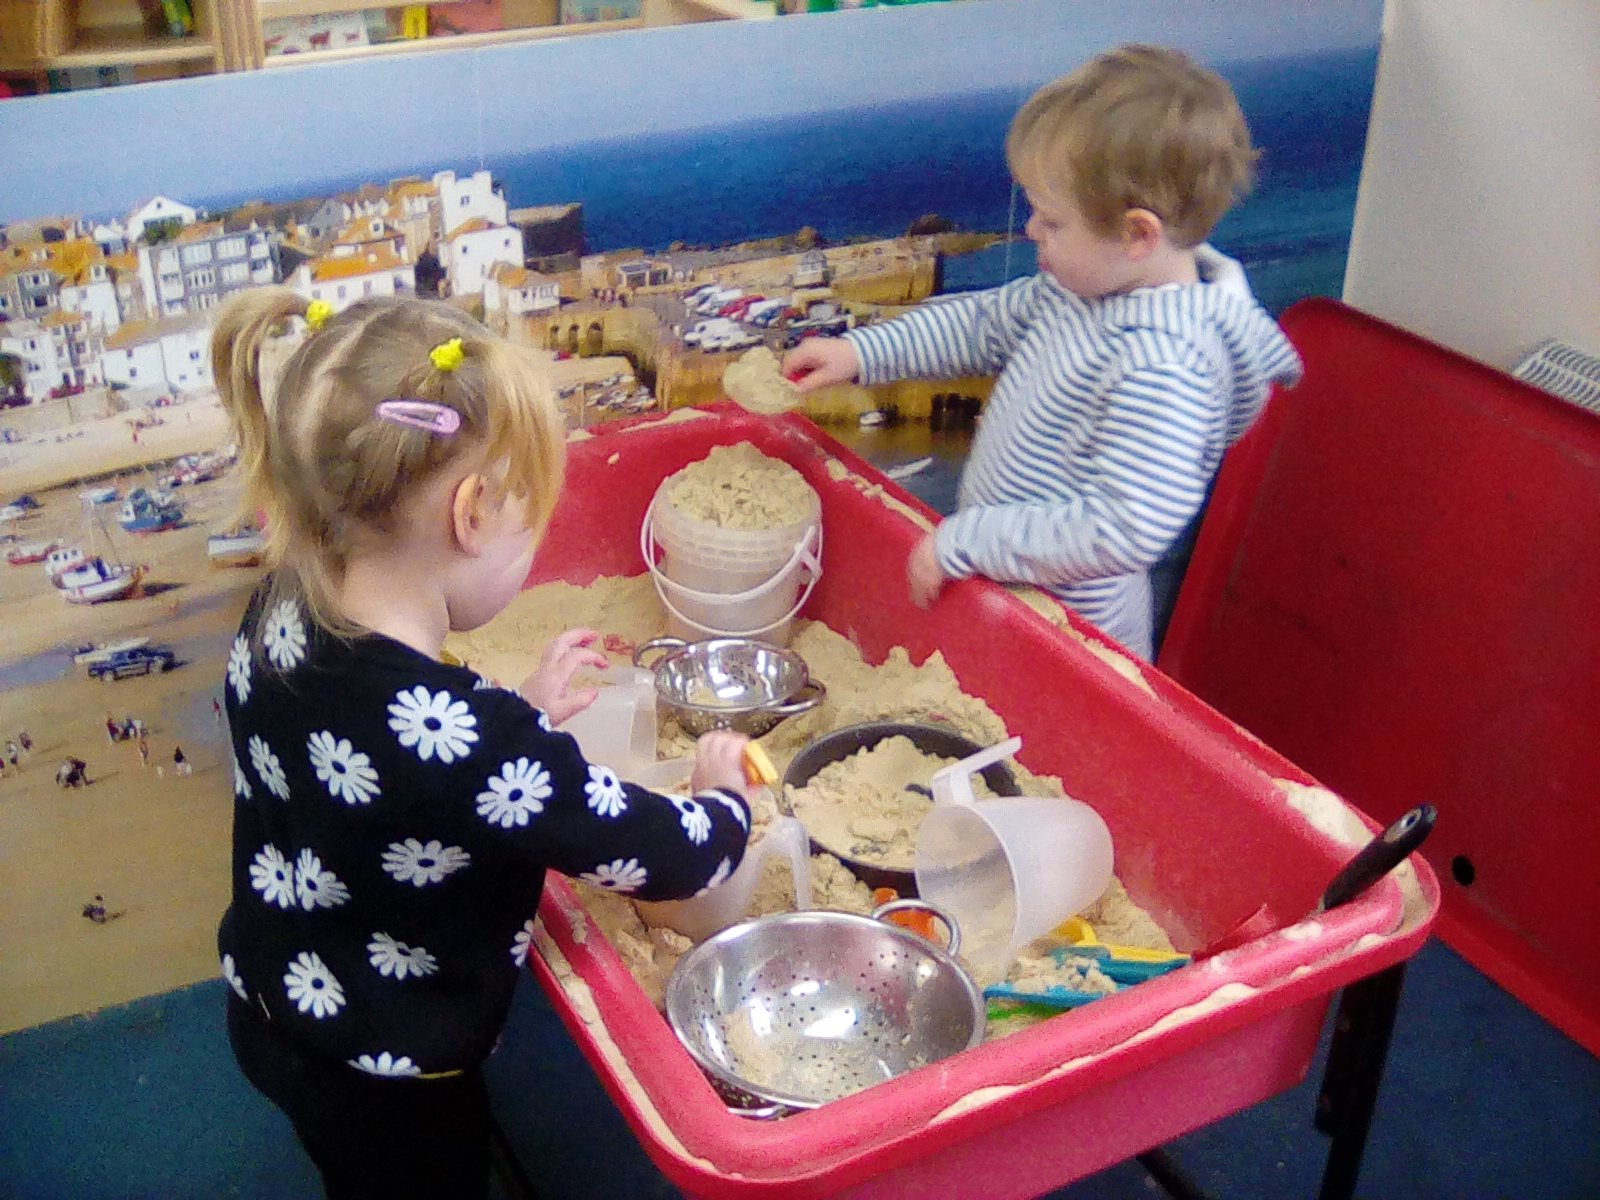 We love to learn through play